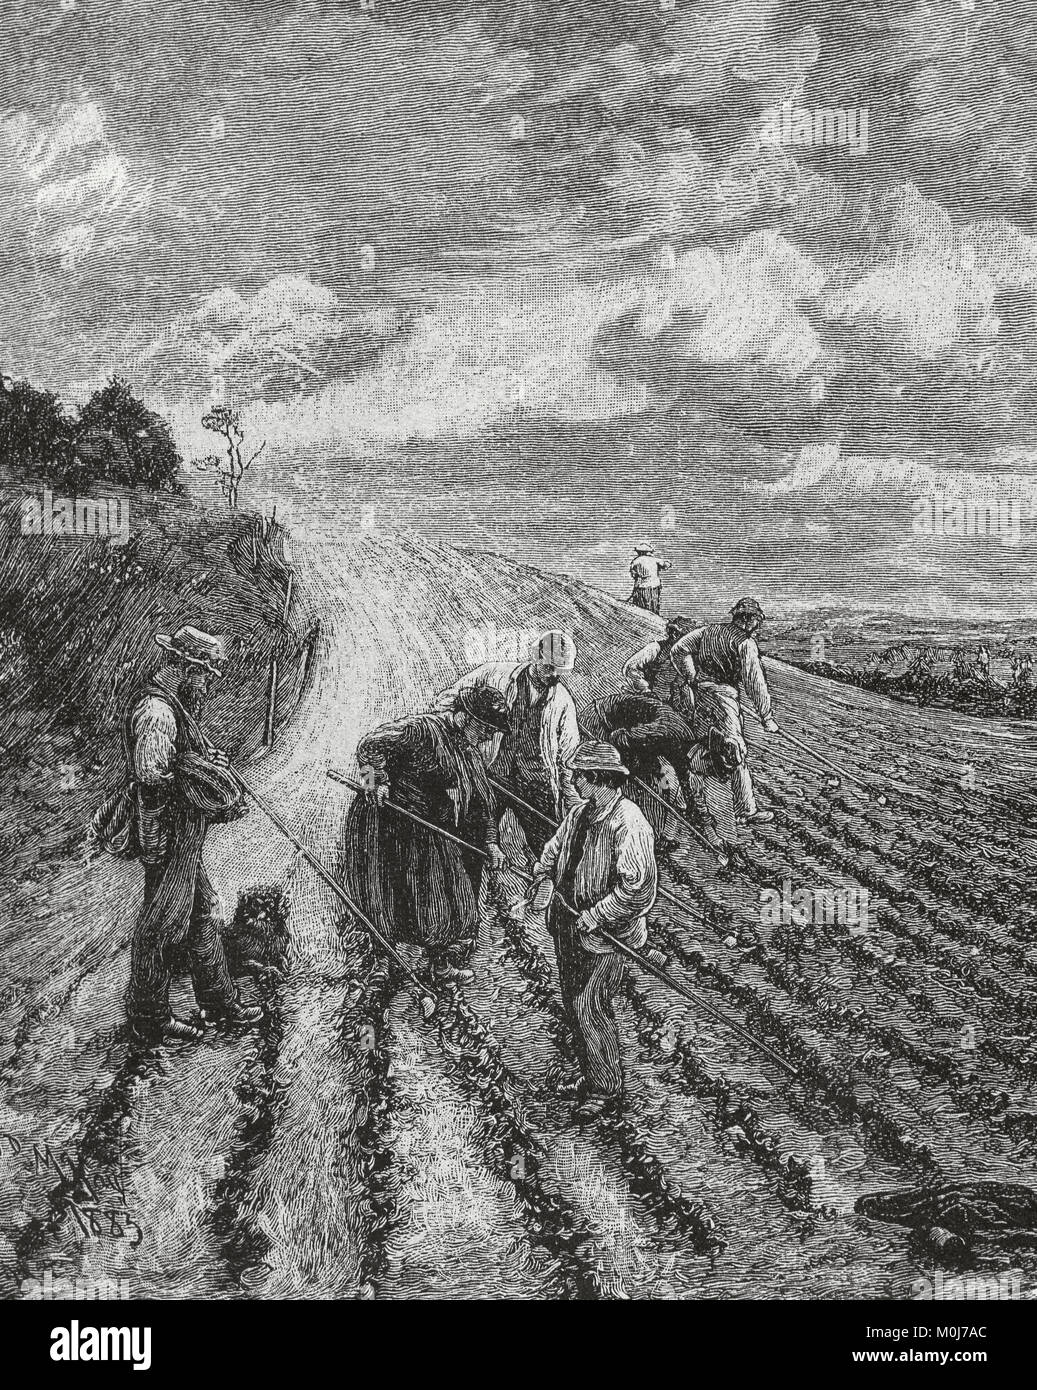 Peasants working in the field. Engraving Stock Photo